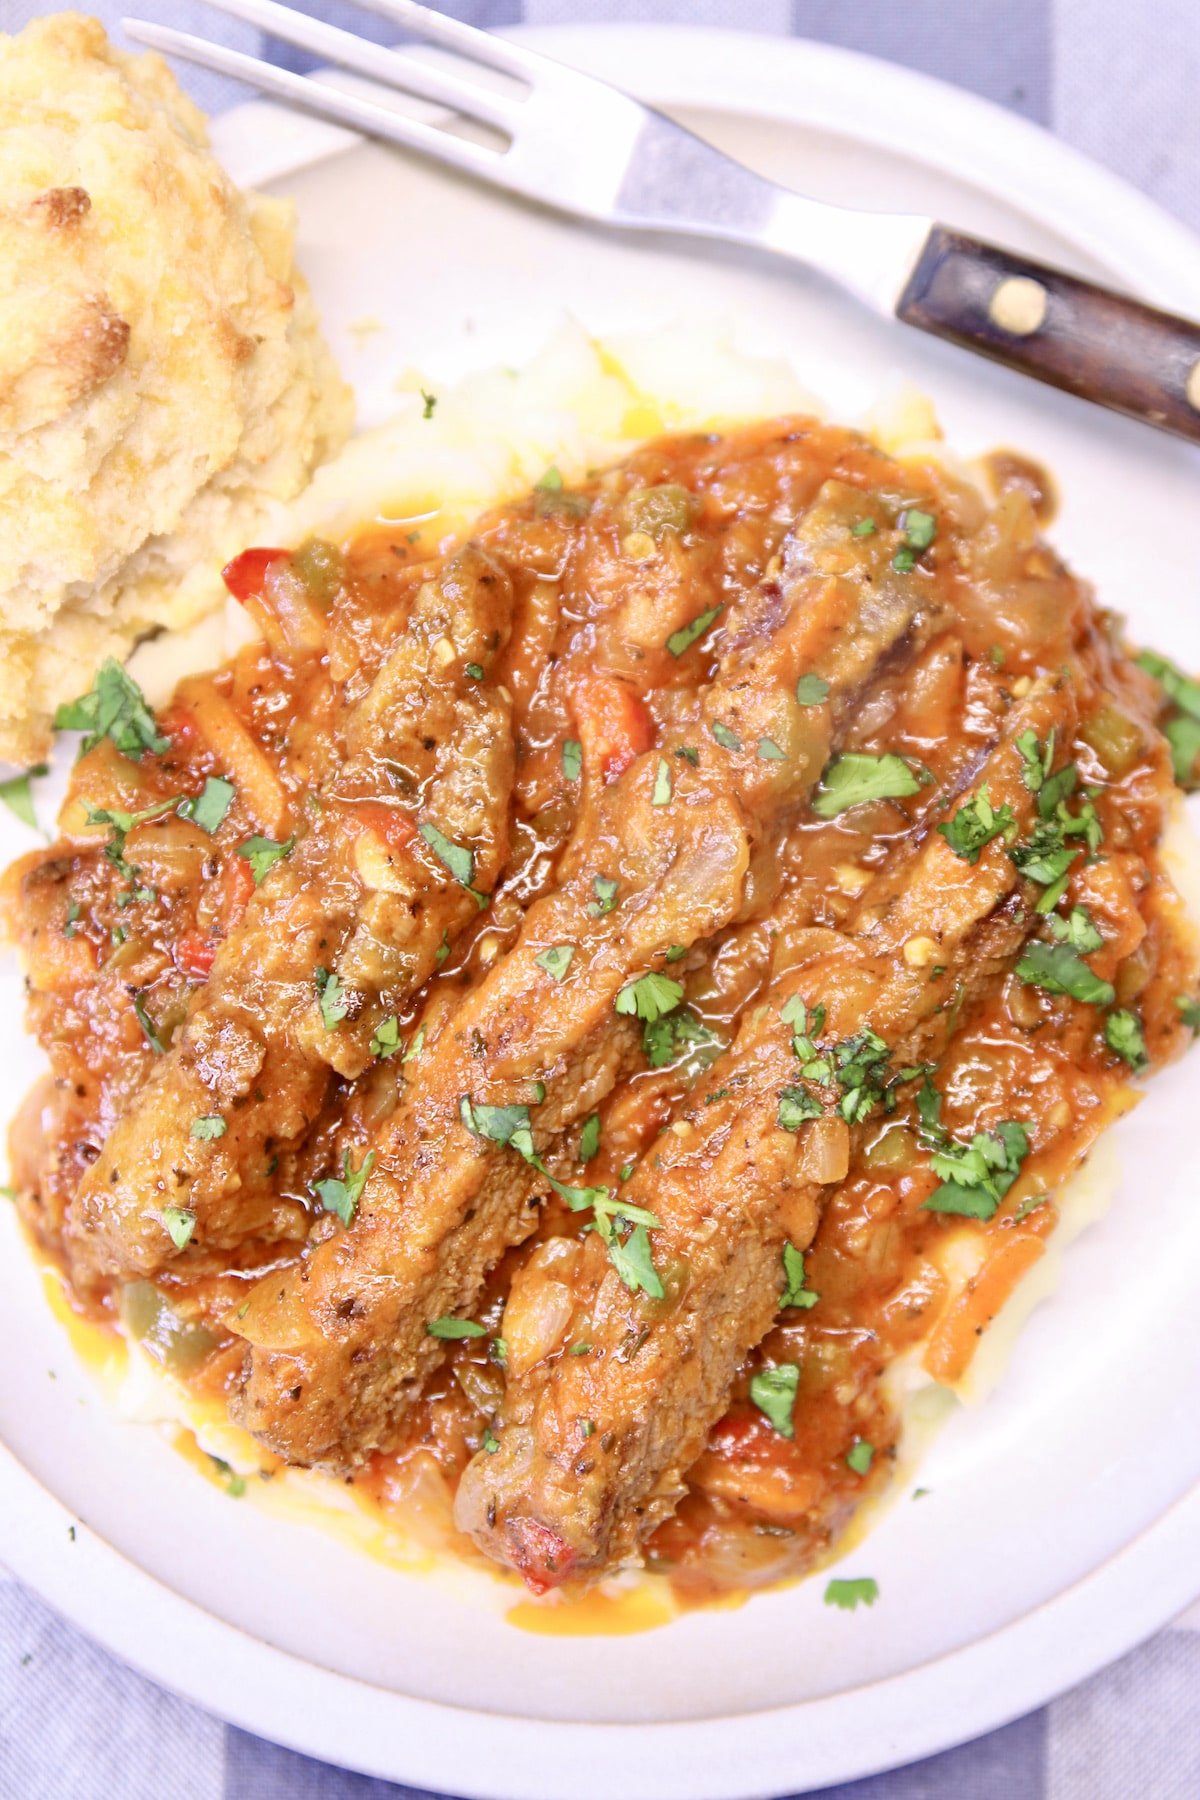 Swiss Steak over mashed potatoes on a plate - close up.